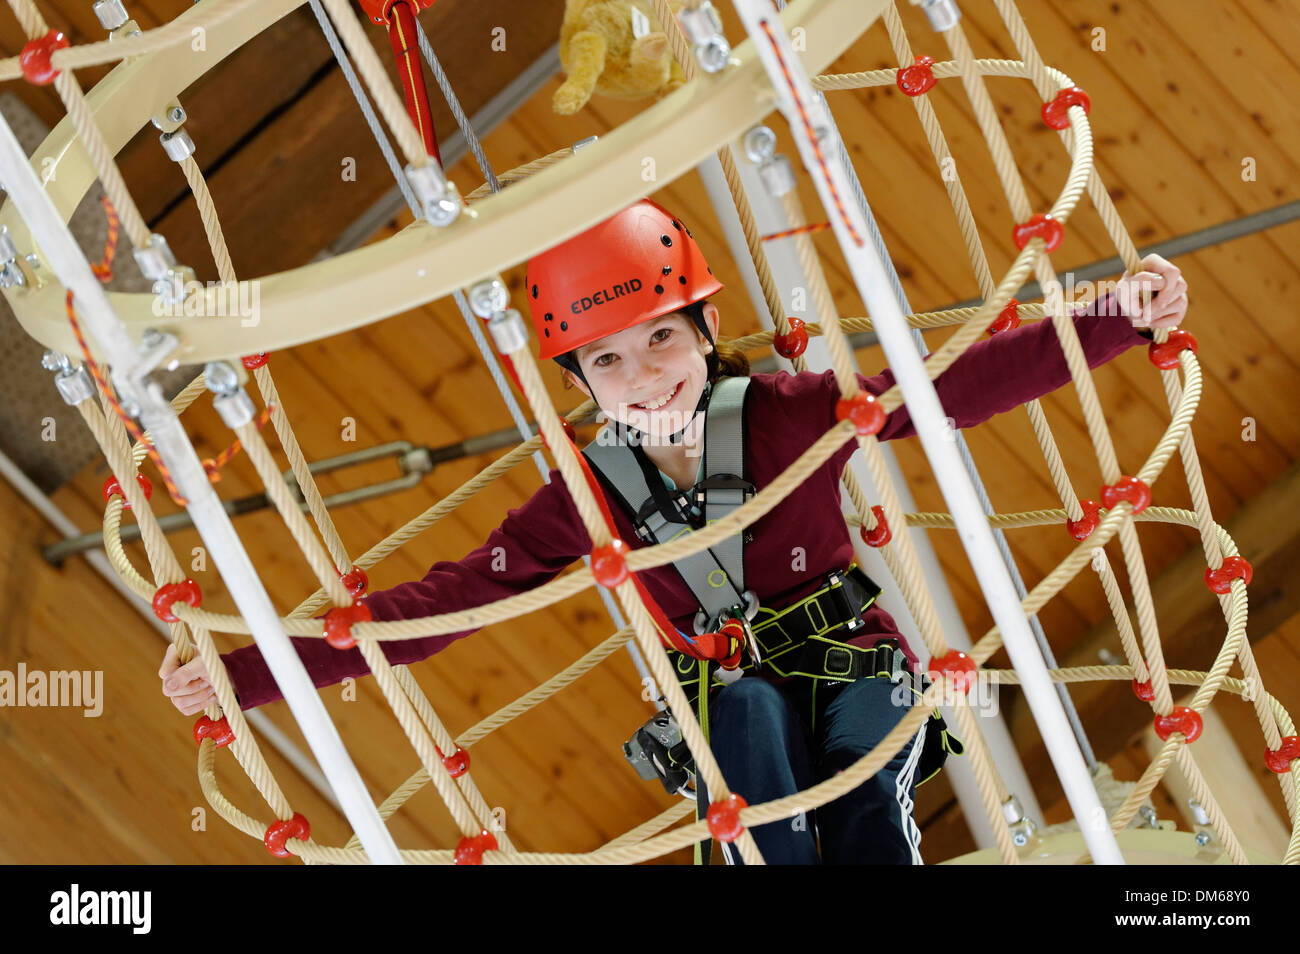 Girl on an indoor high rope-course in a Salewa Outlet Shop in Füssen, Bavaria, Germany Stock Photo